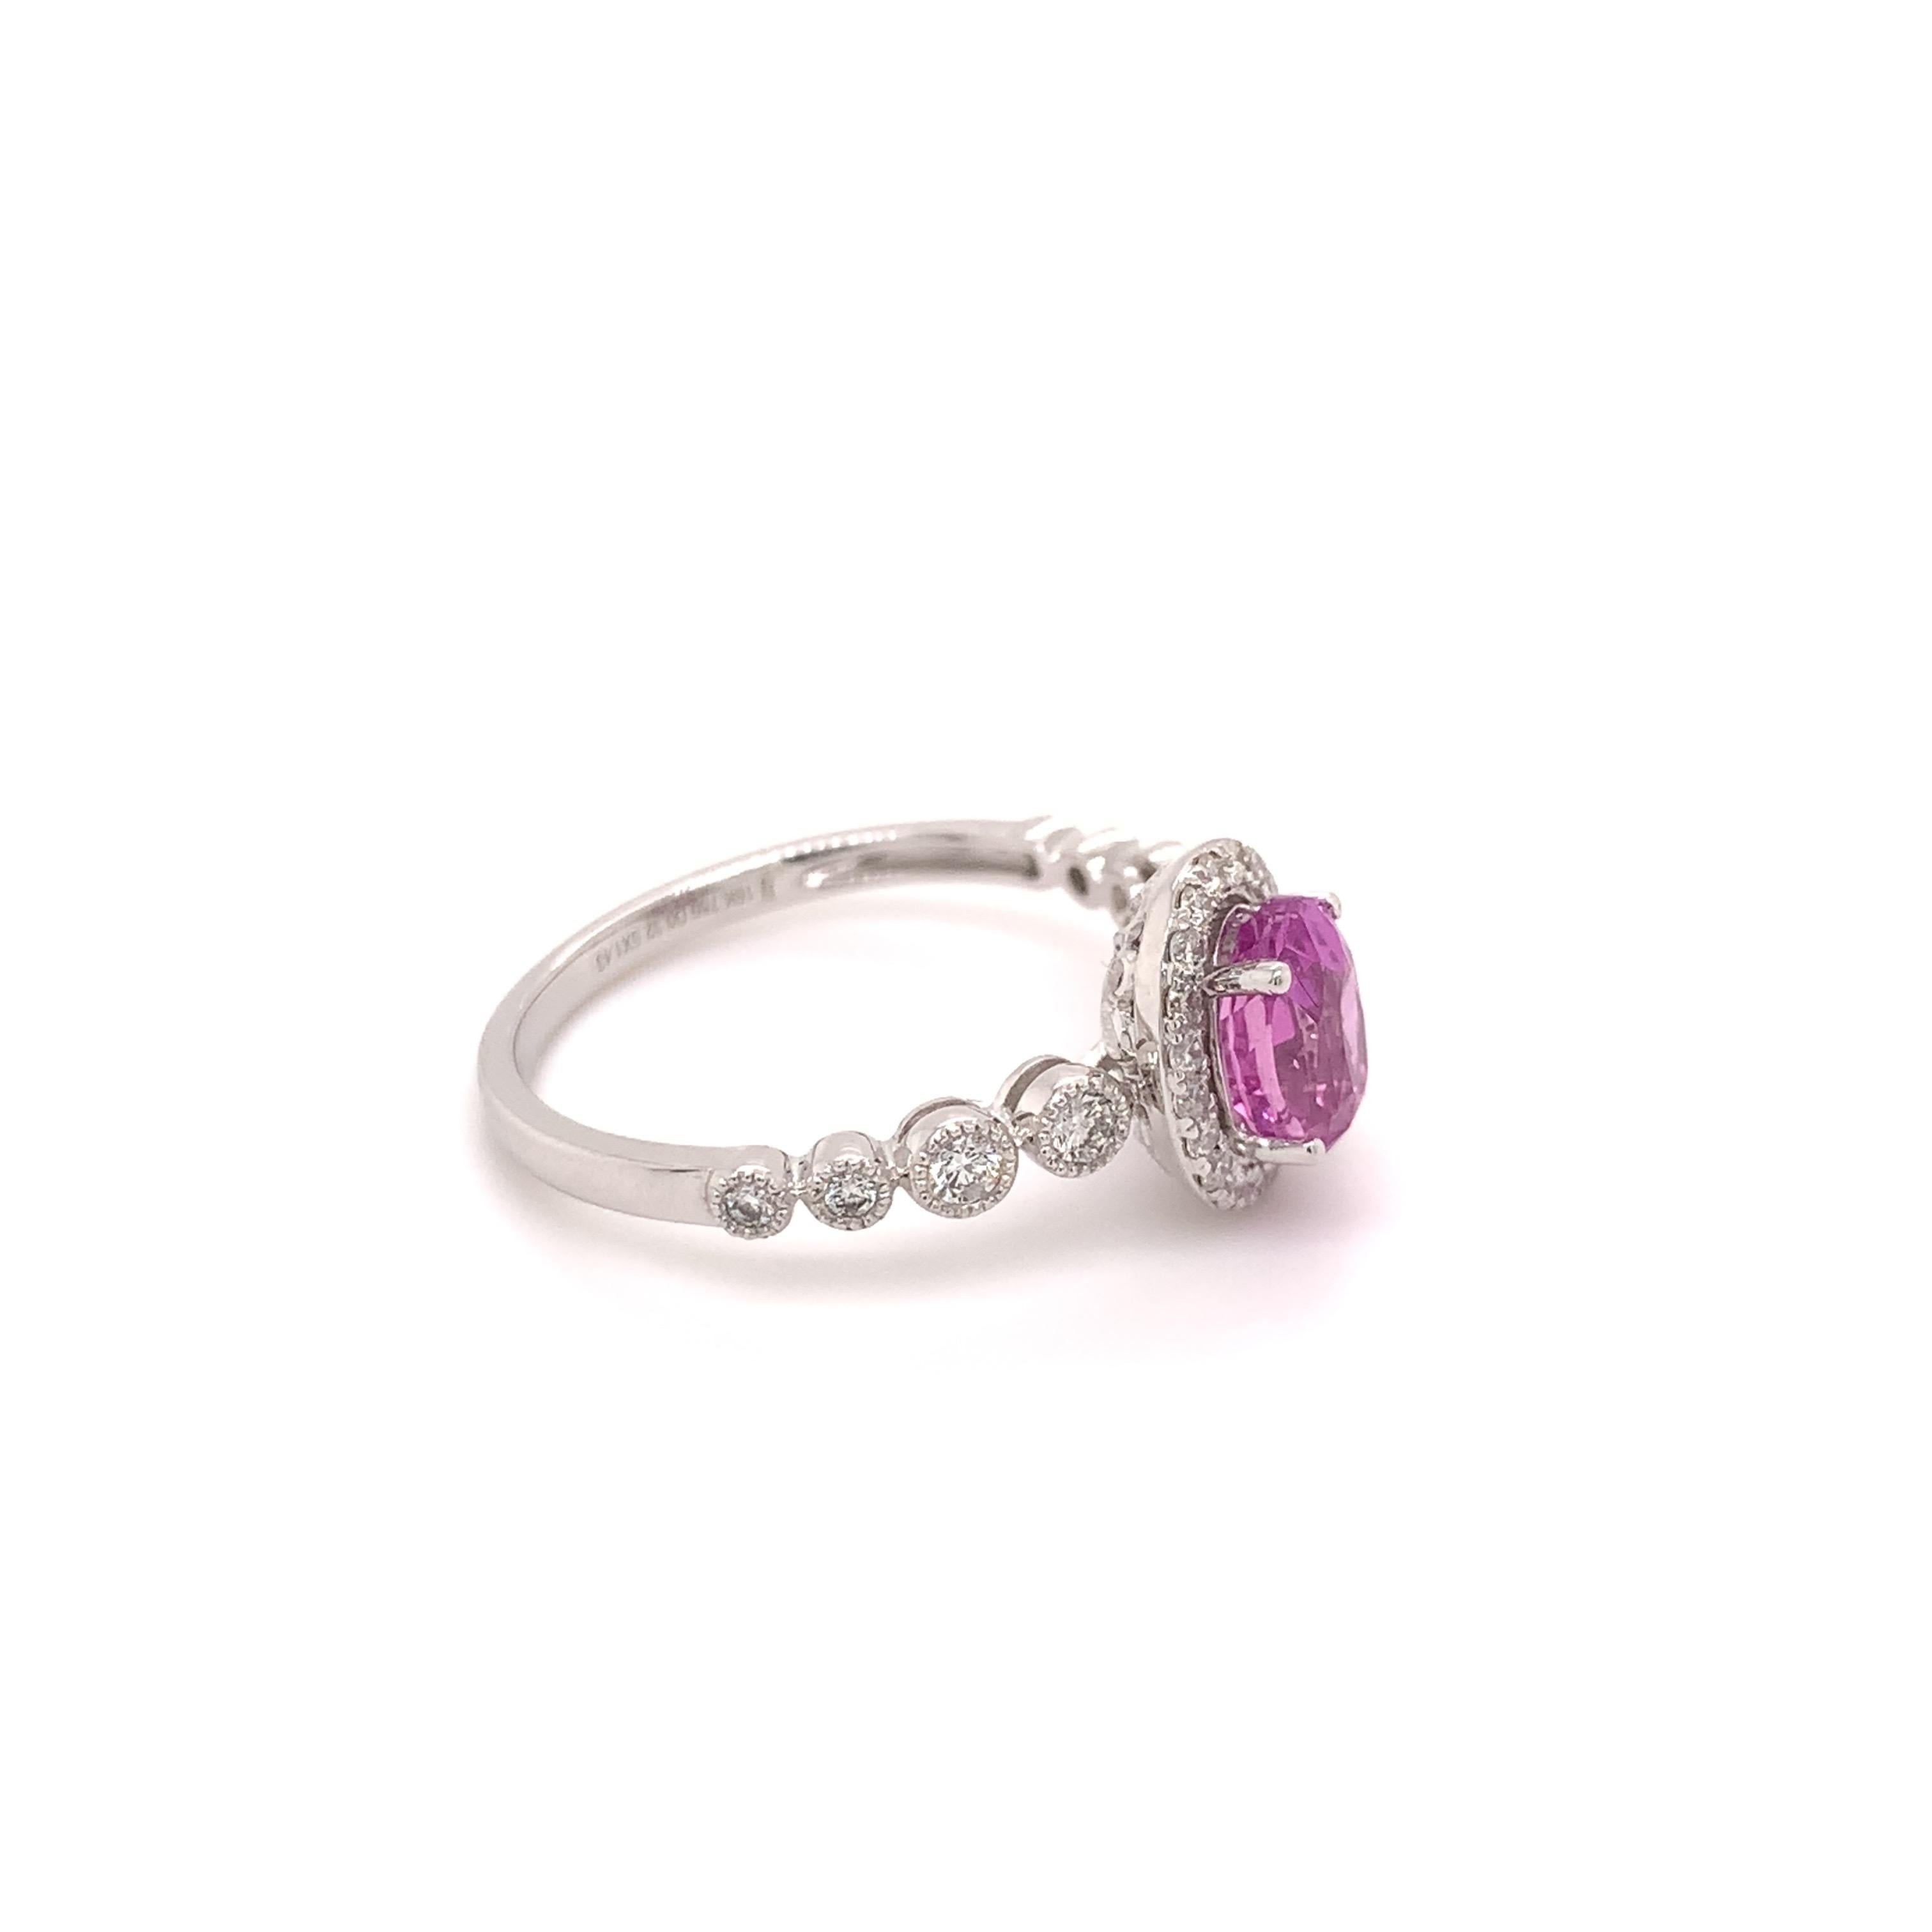 Elegant pink sapphire diamond ring. High brilliance, oval faceted, 1.43 carats natural pink sapphire mounted in high profile with four bead prongs, accented with round brilliant diamonds. Handcrafted design set in 18 karats high polished white gold.